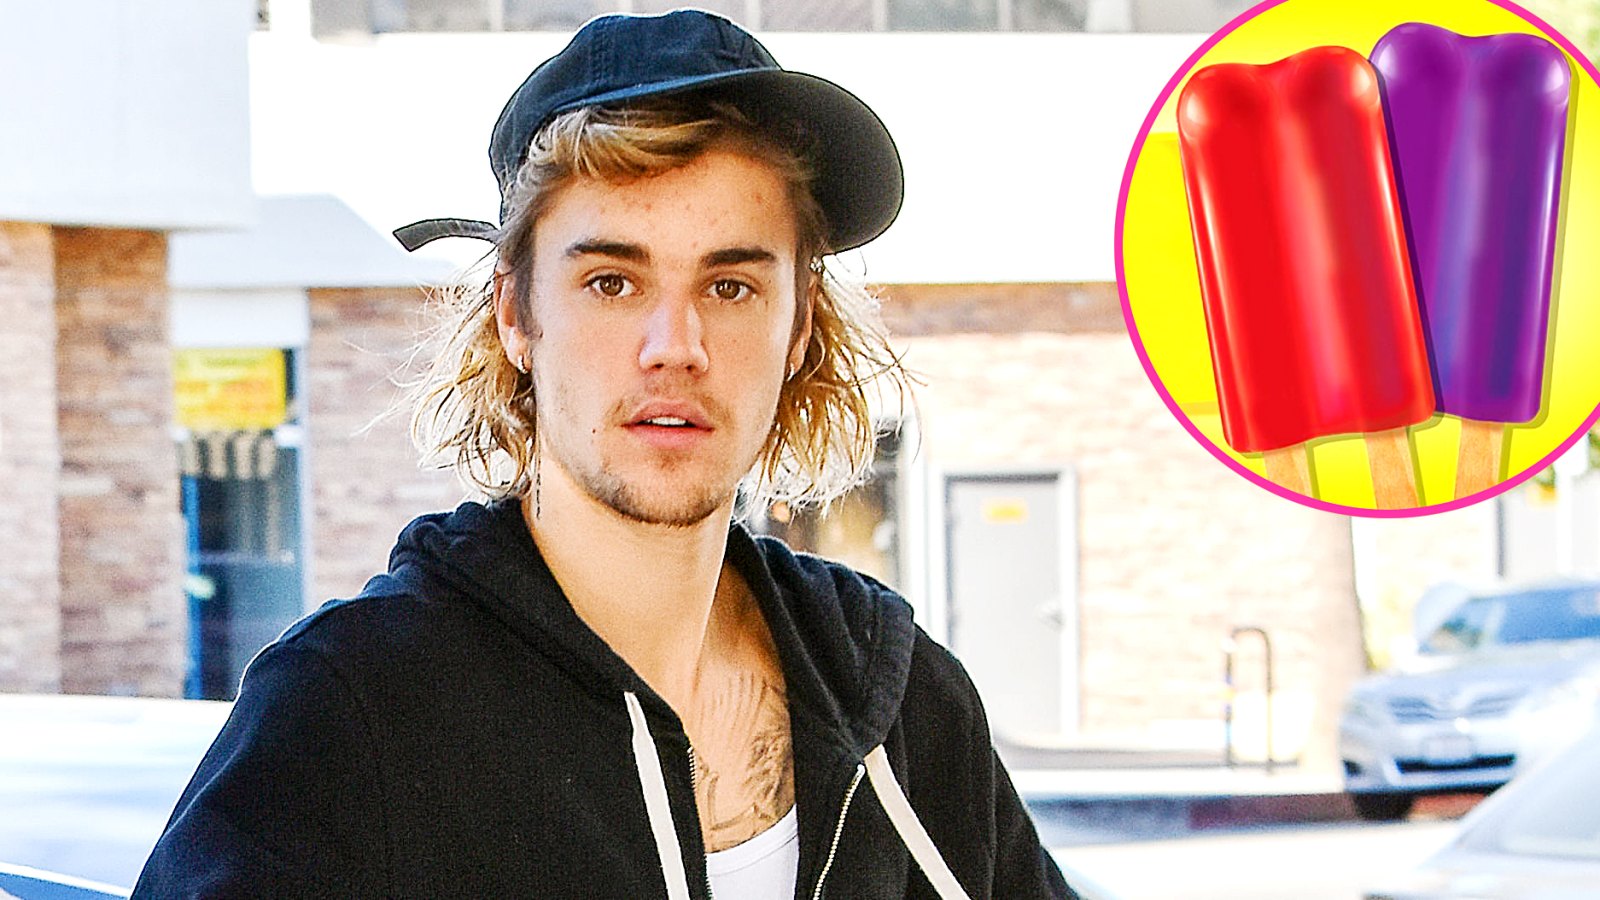 Popsicle’s Double Pops Could Be Returning Thanks to Justin Bieber